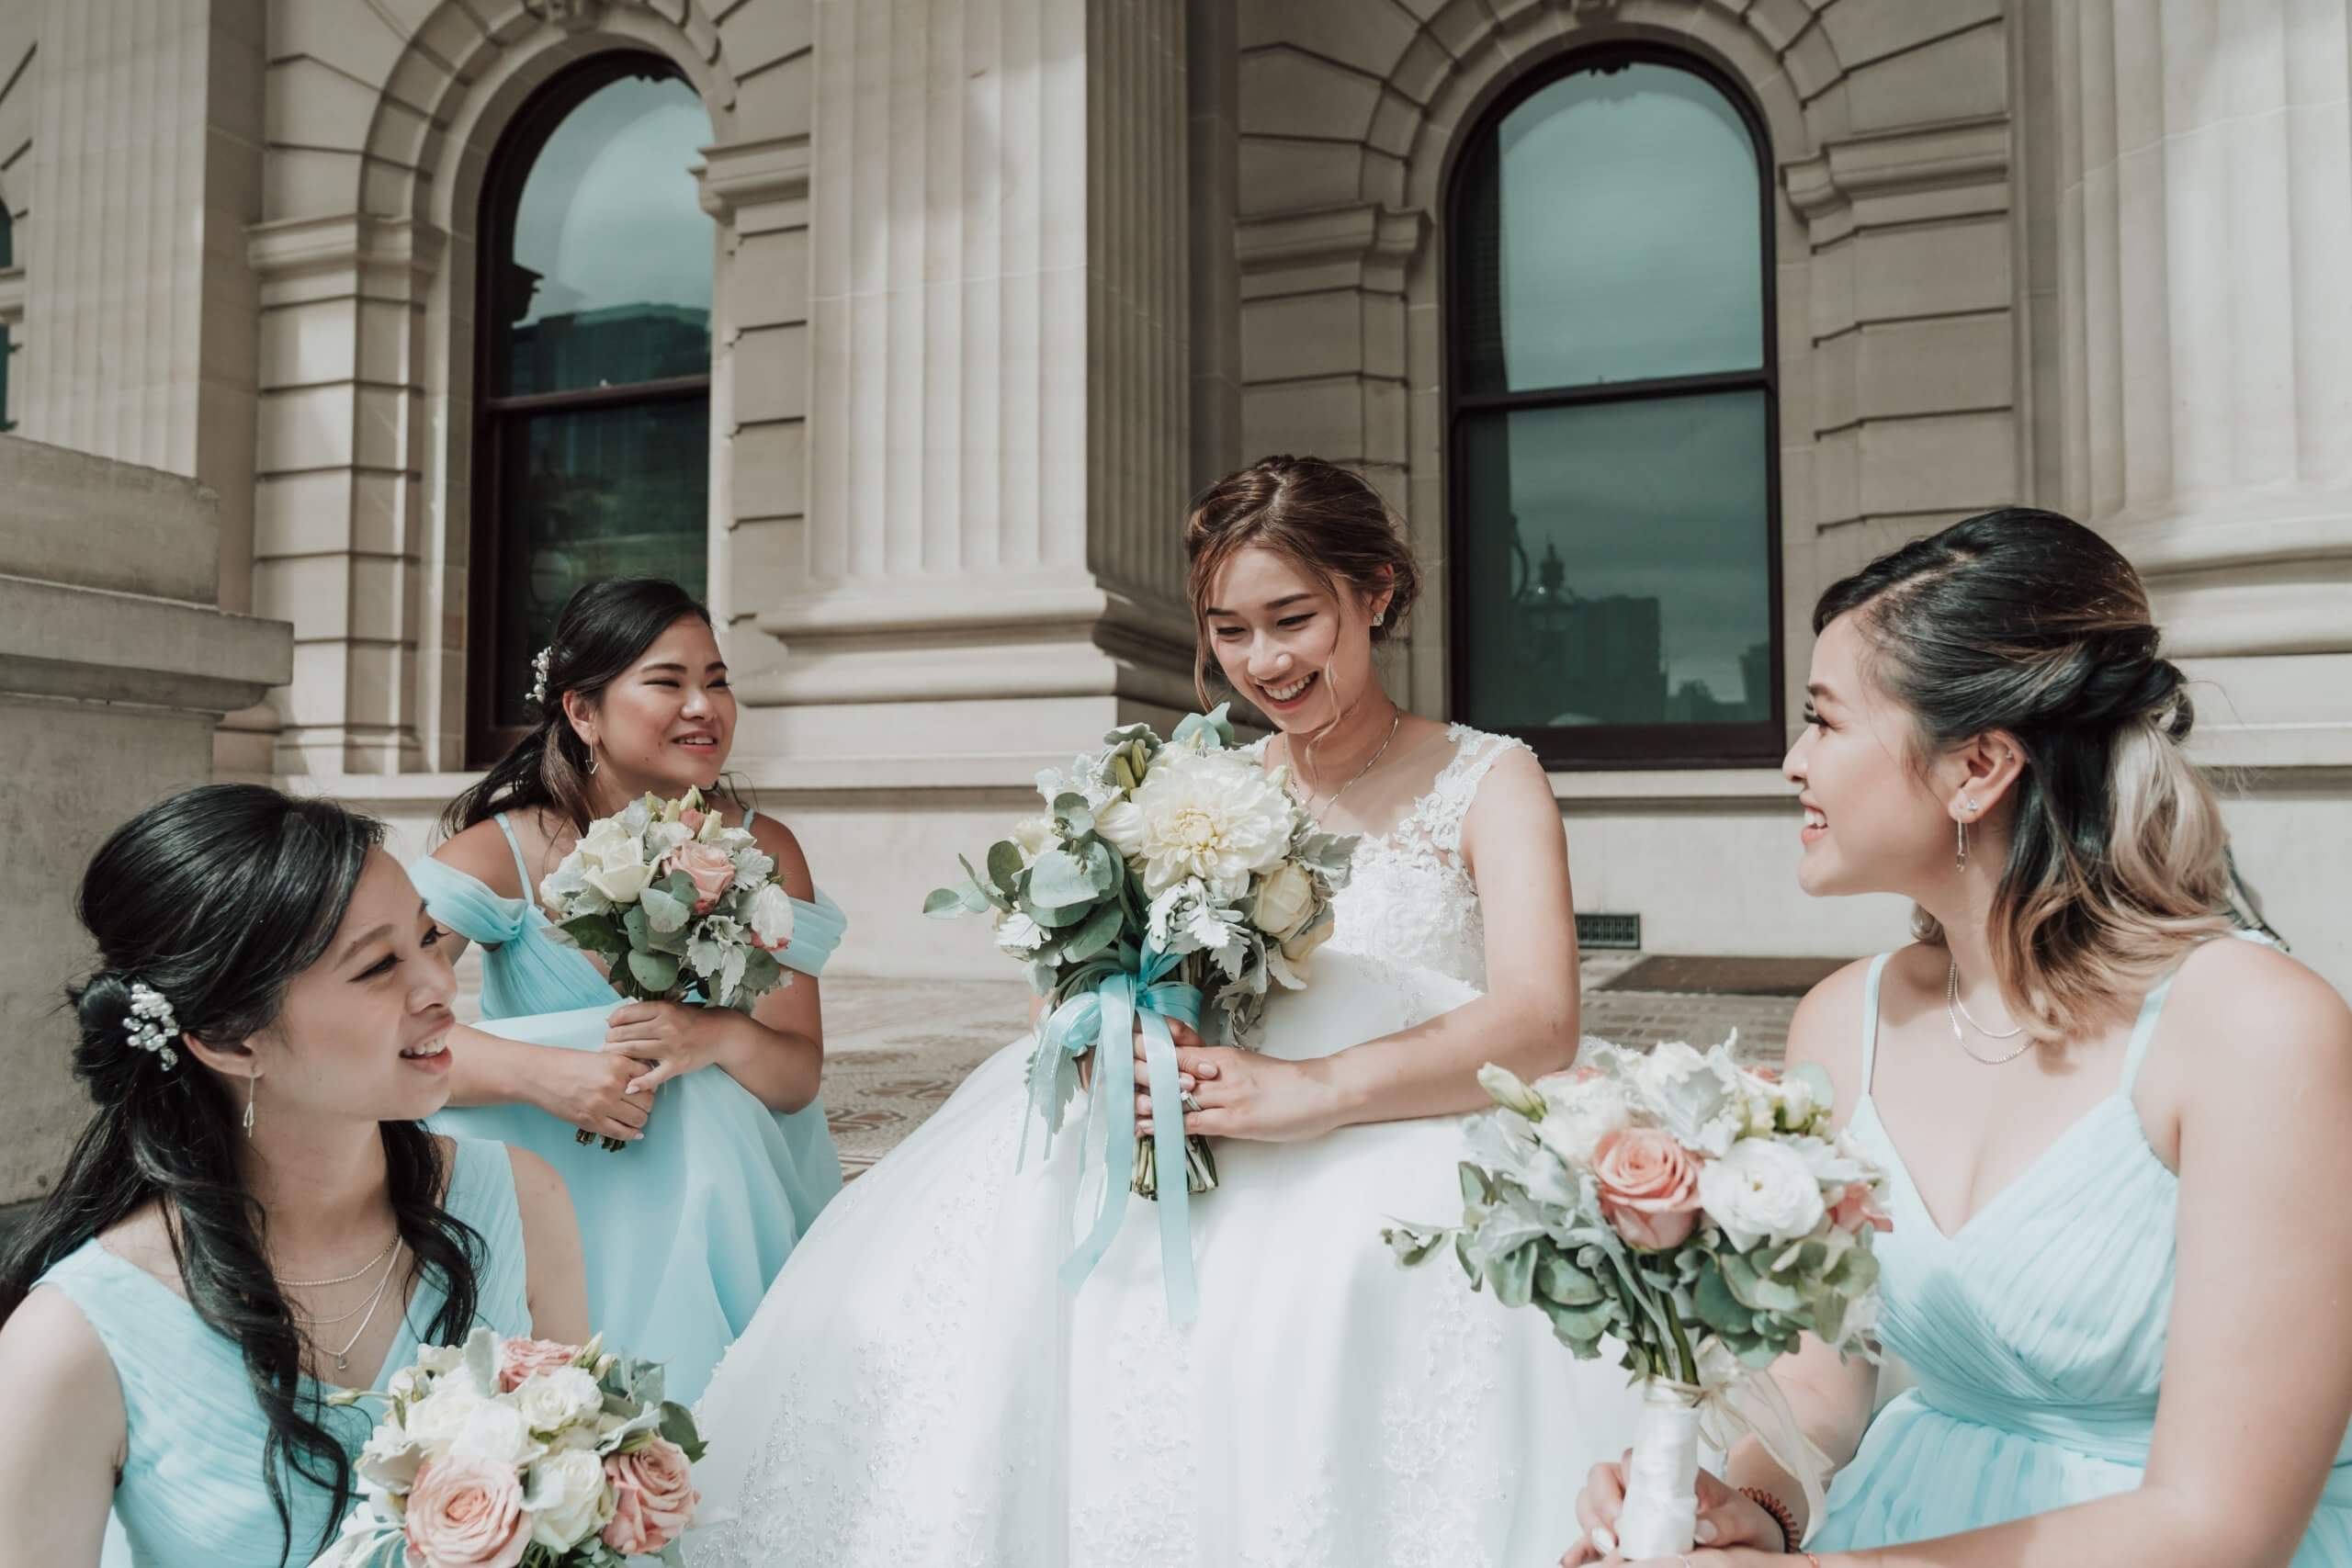 The bride sits on the stairs of a beautiful building with her baby blue-dressed bridesmaids sitting all around her.